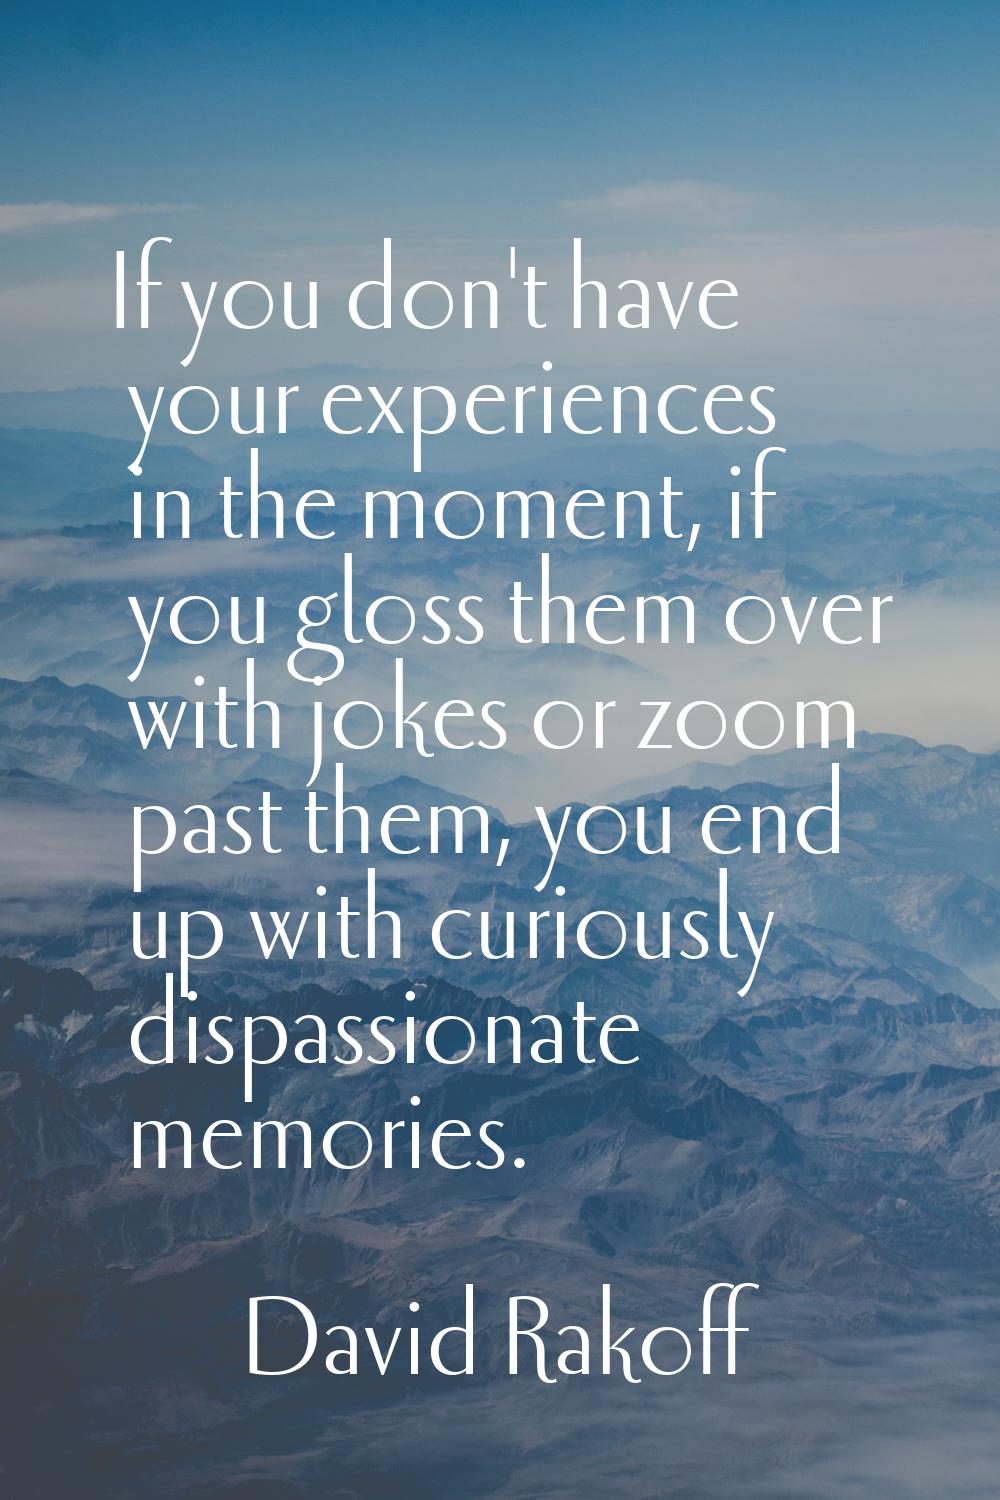 If you don't have your experiences in the moment, if you gloss them over with jokes or zoom past th